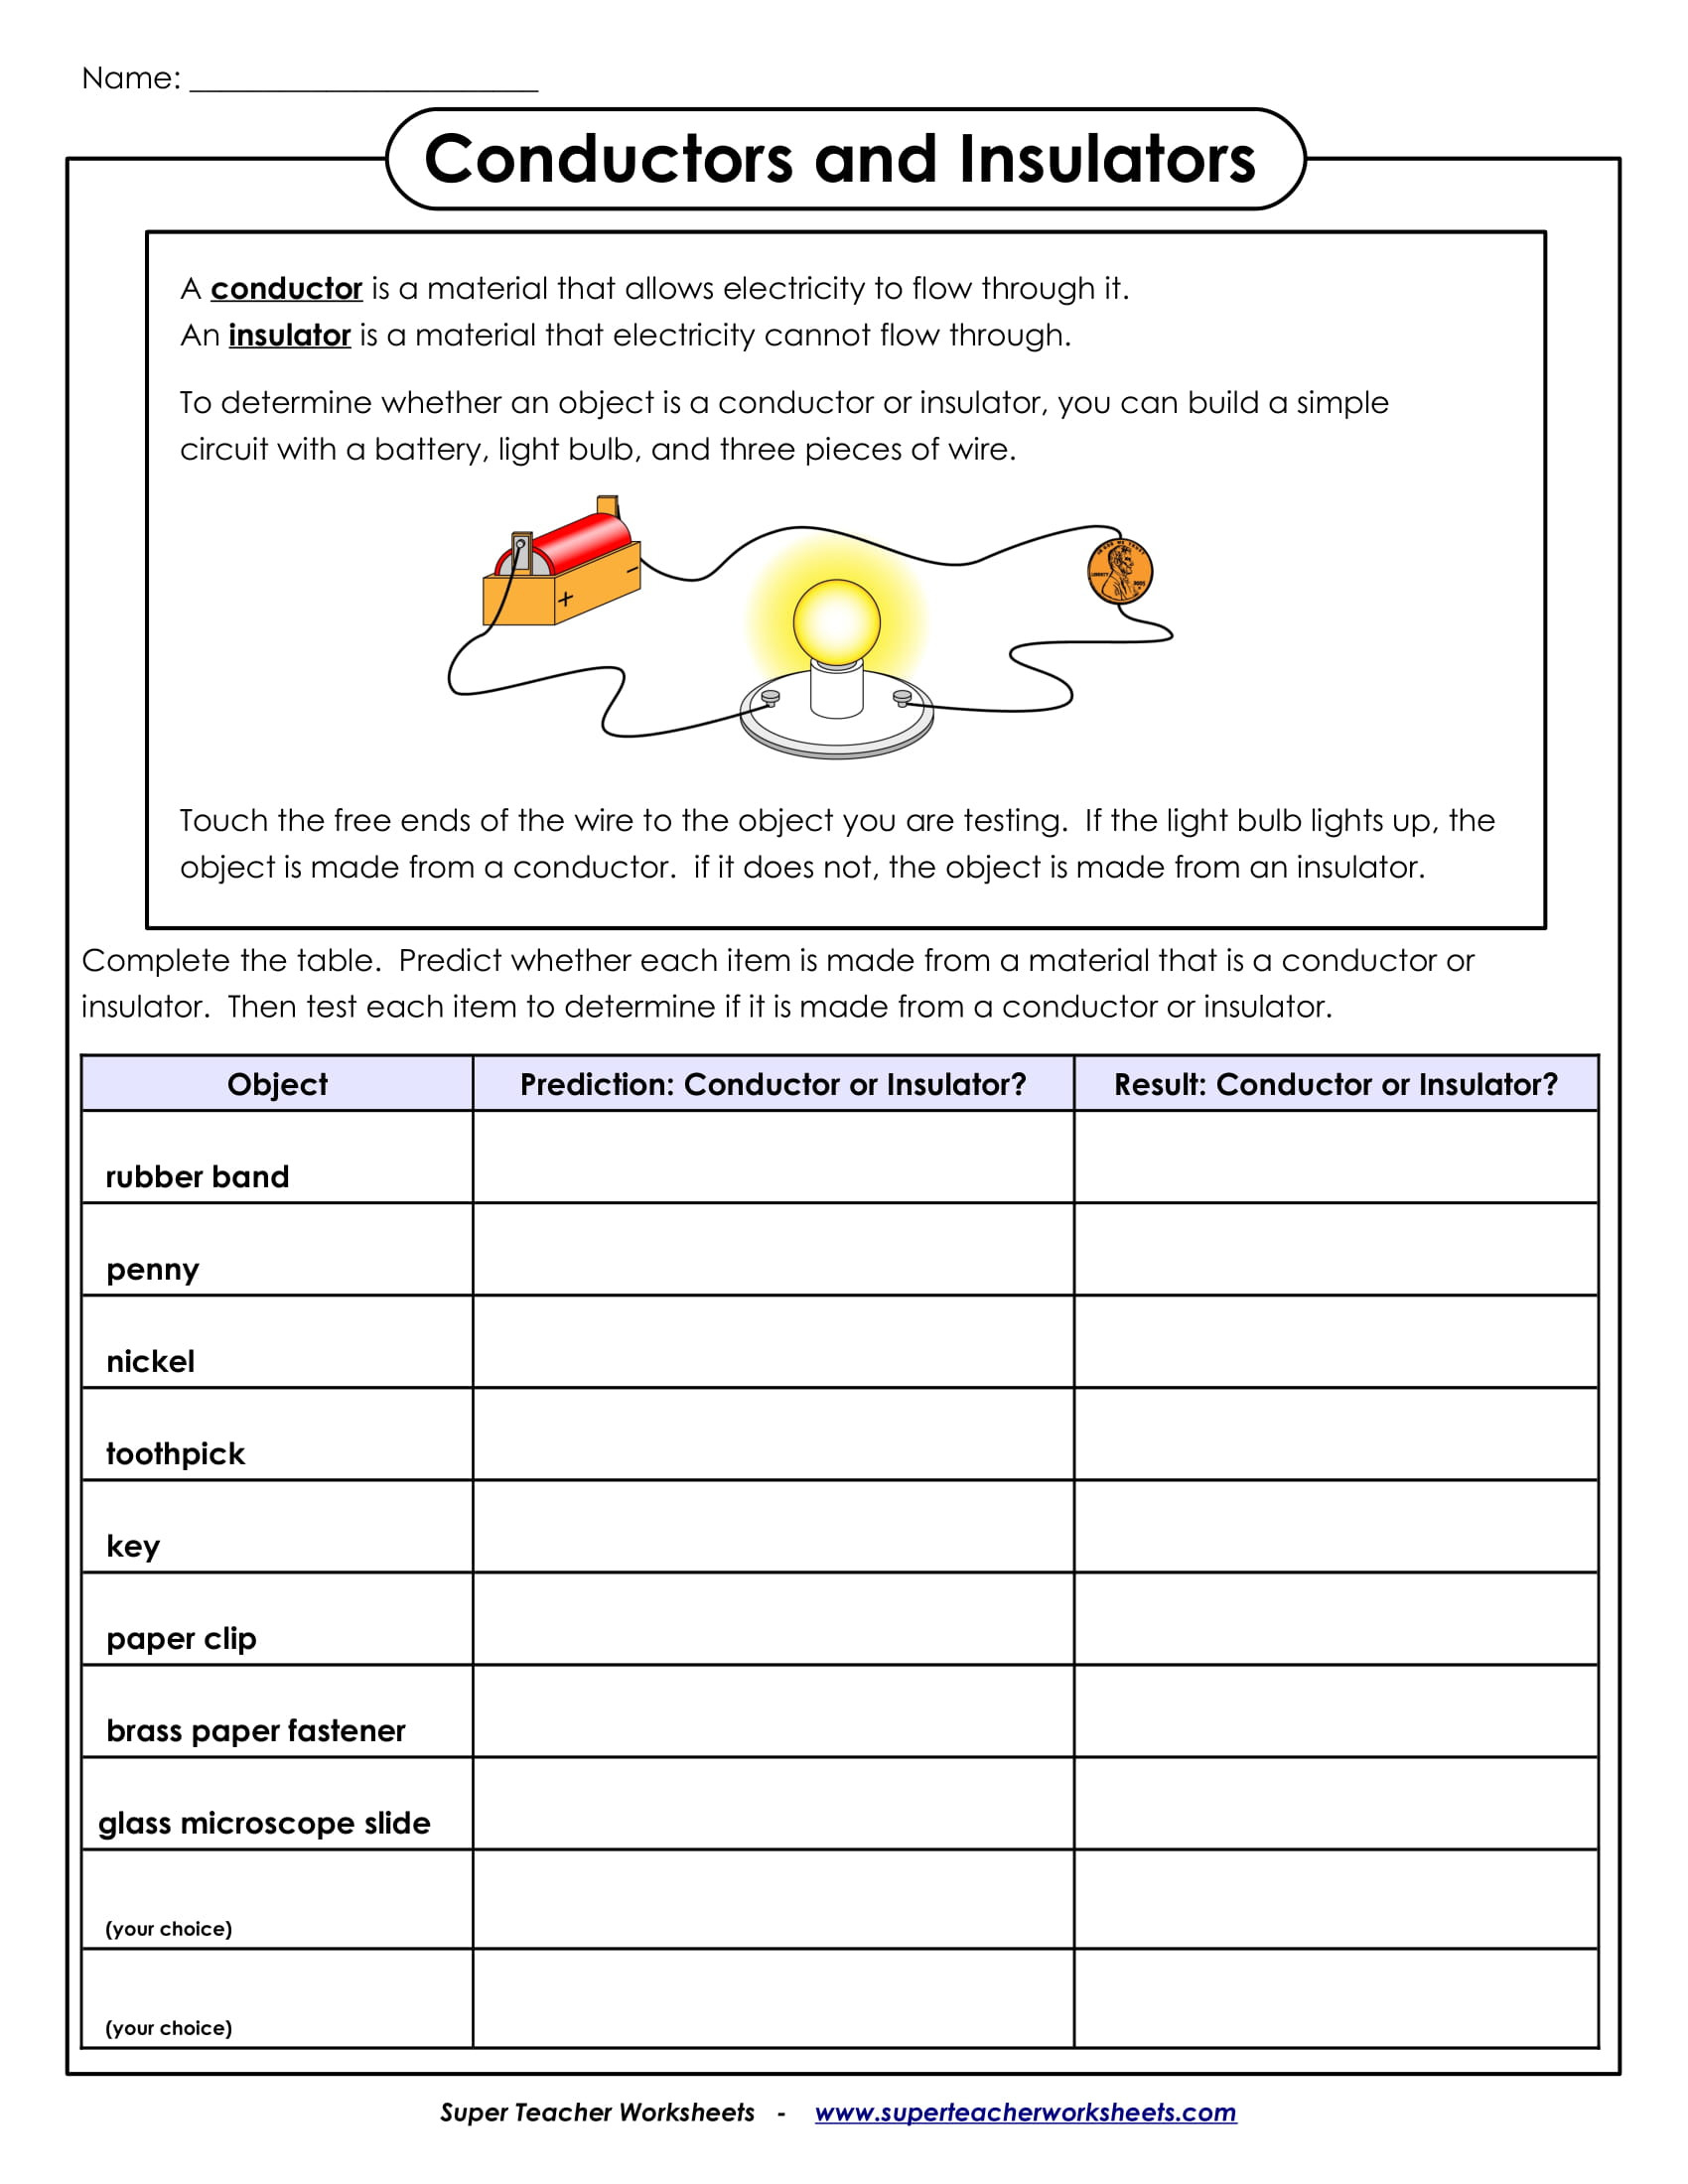 5 science worksheets for students pdf db excelcom